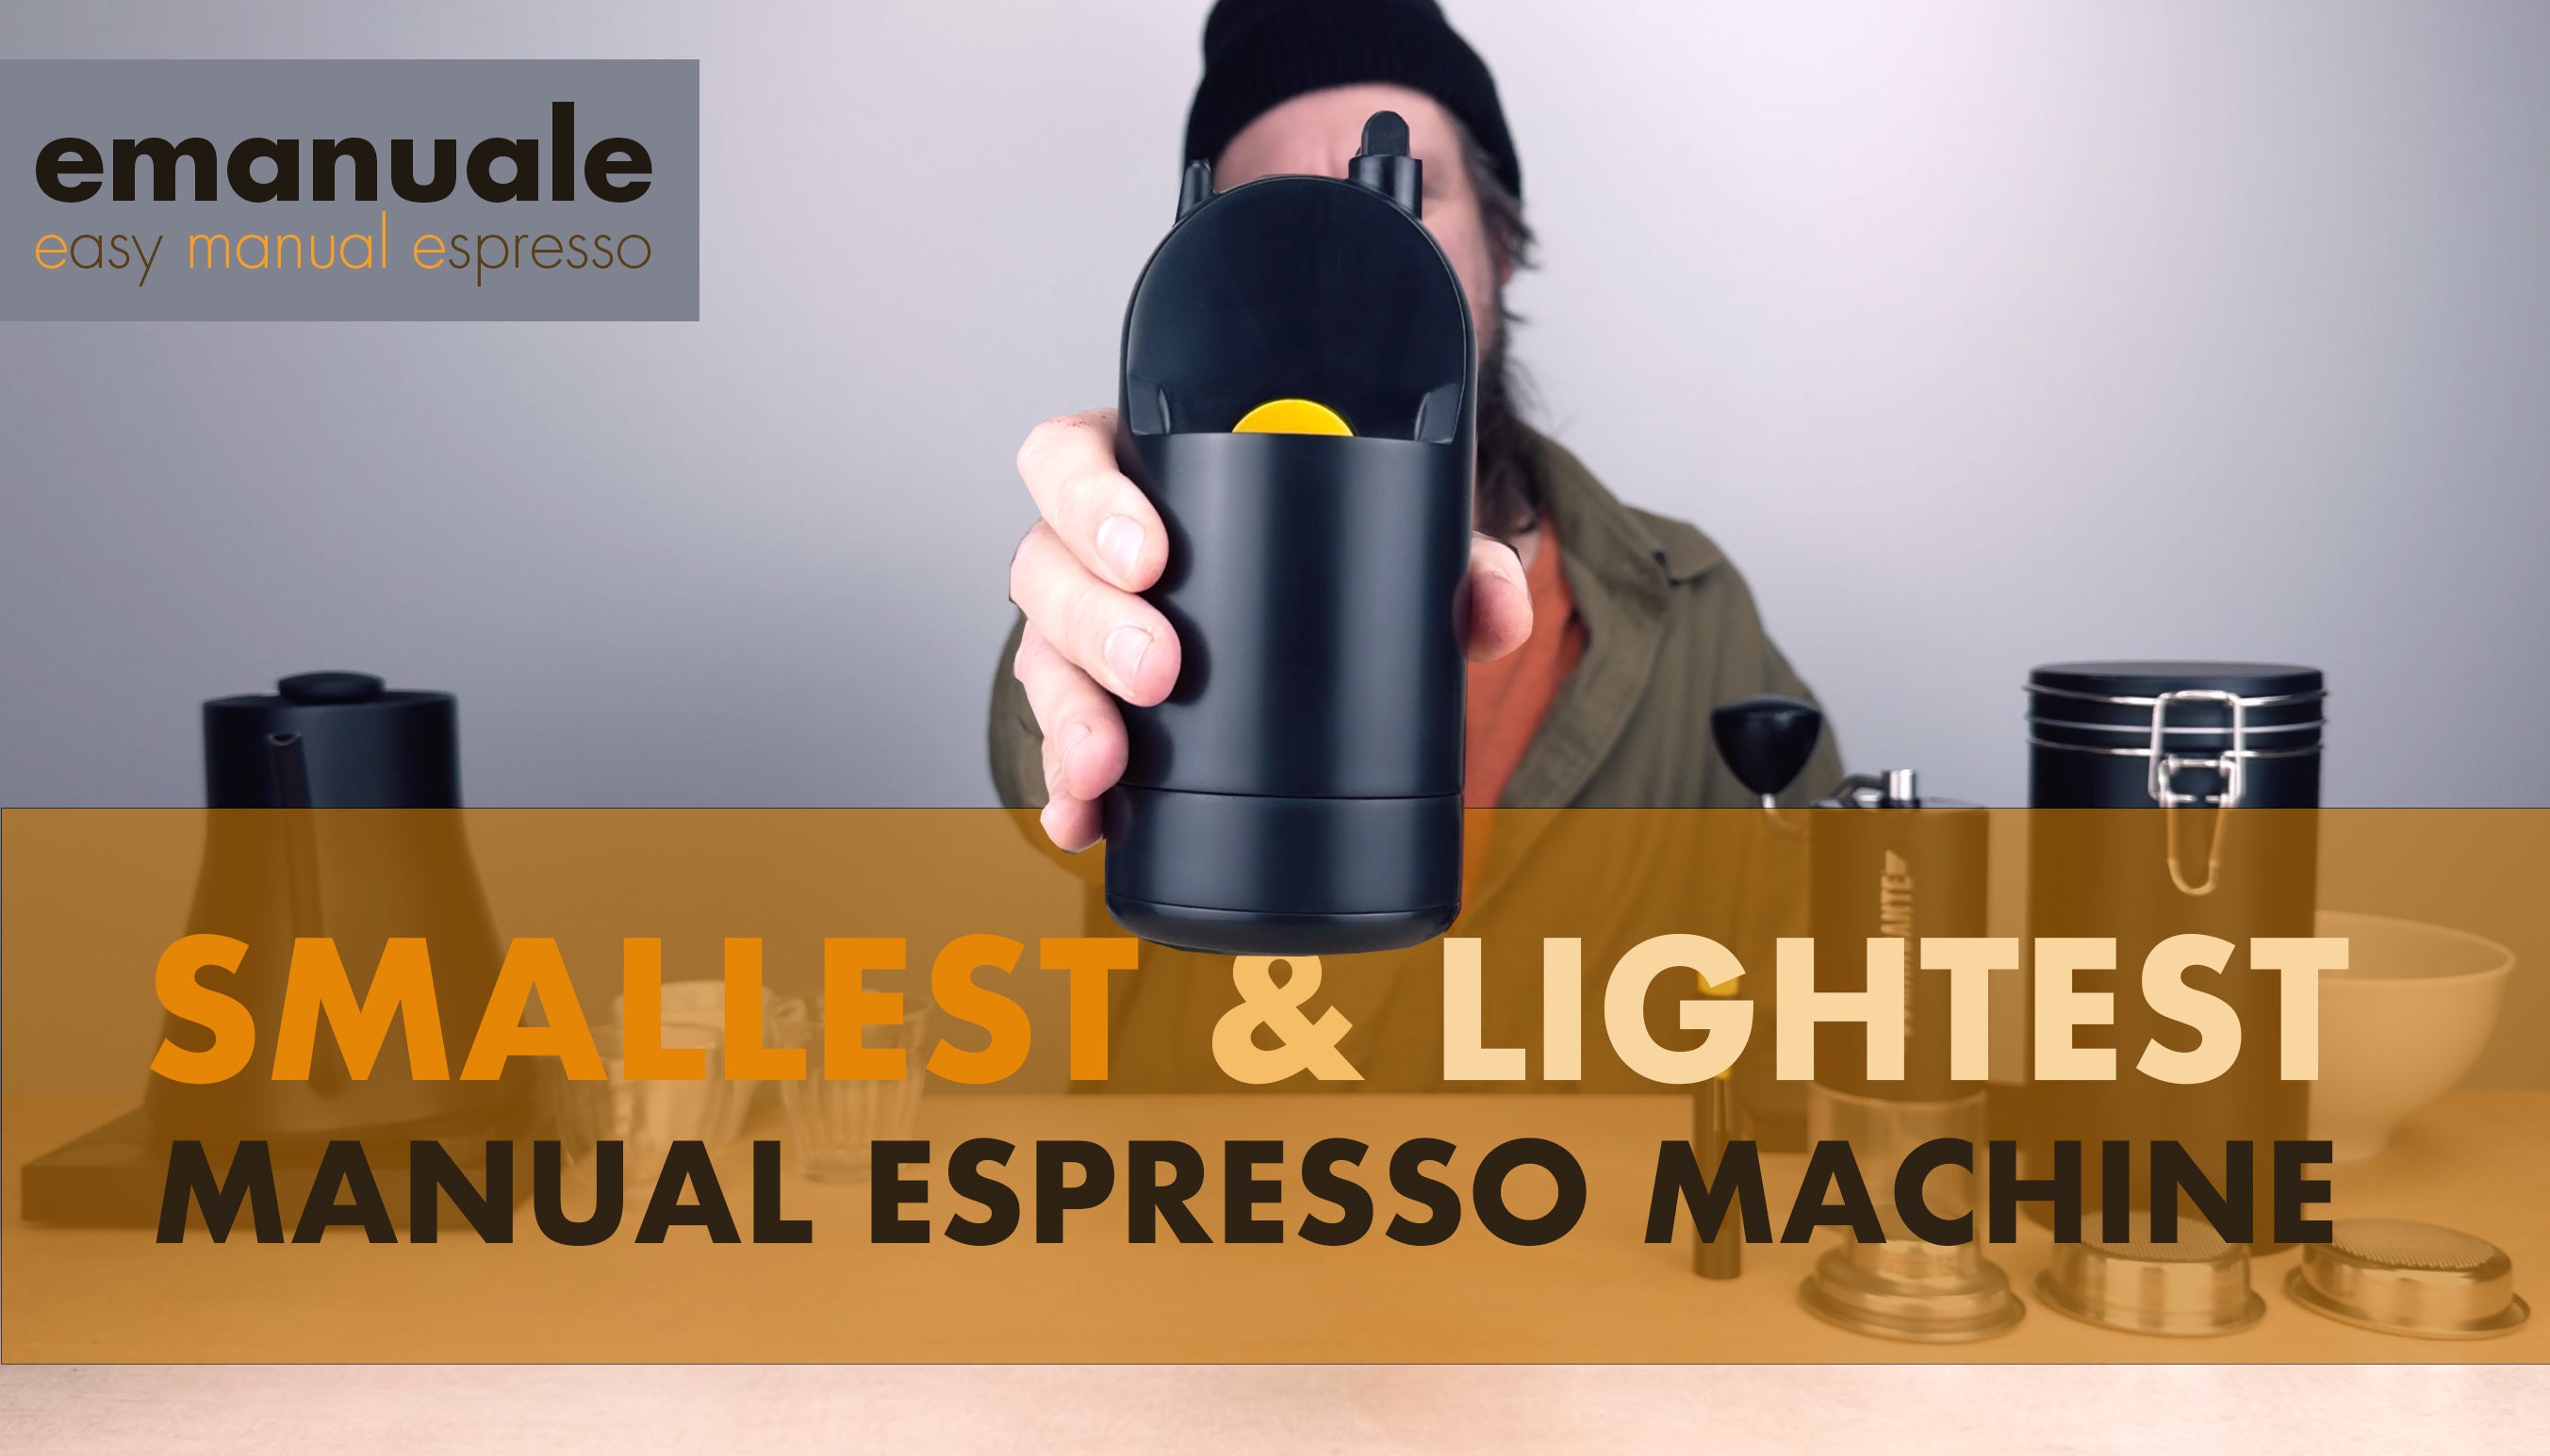 Video laden: video about emanuale, the smallest &amp; lightest manual espresso machine